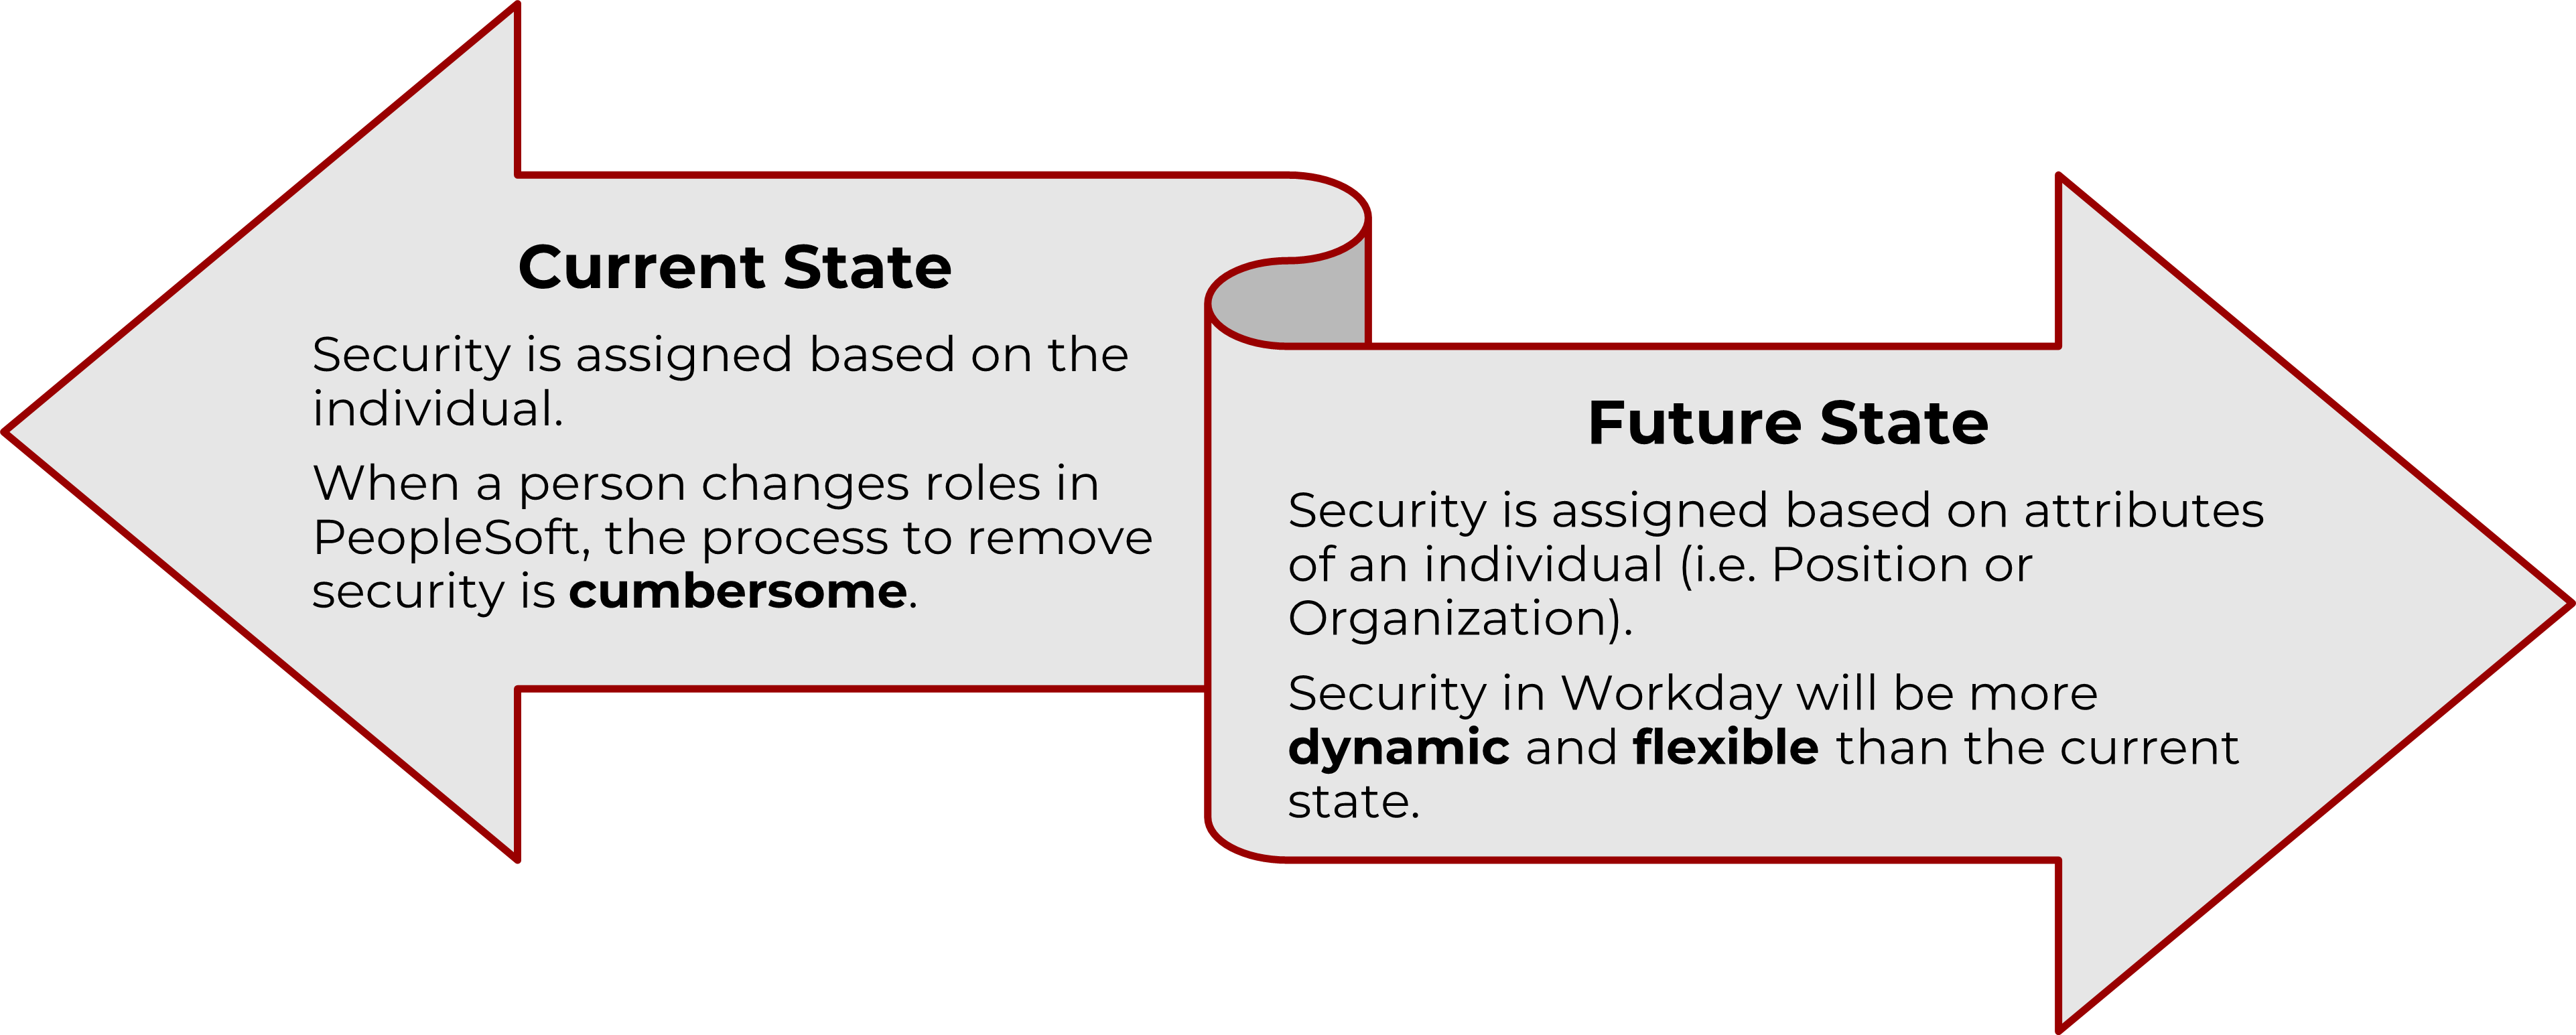 Graphic depicting current state and future state of security roles in Workday. In the current state, security is assigned based on the individual. That means when a person changes roles in PeopleSoft, the process to remove security is cumbersome. In the future state, security is assigned based on attributes of an individual (i.e., position or organization). Security in Workday will be more dynamic and flexible than the current state.